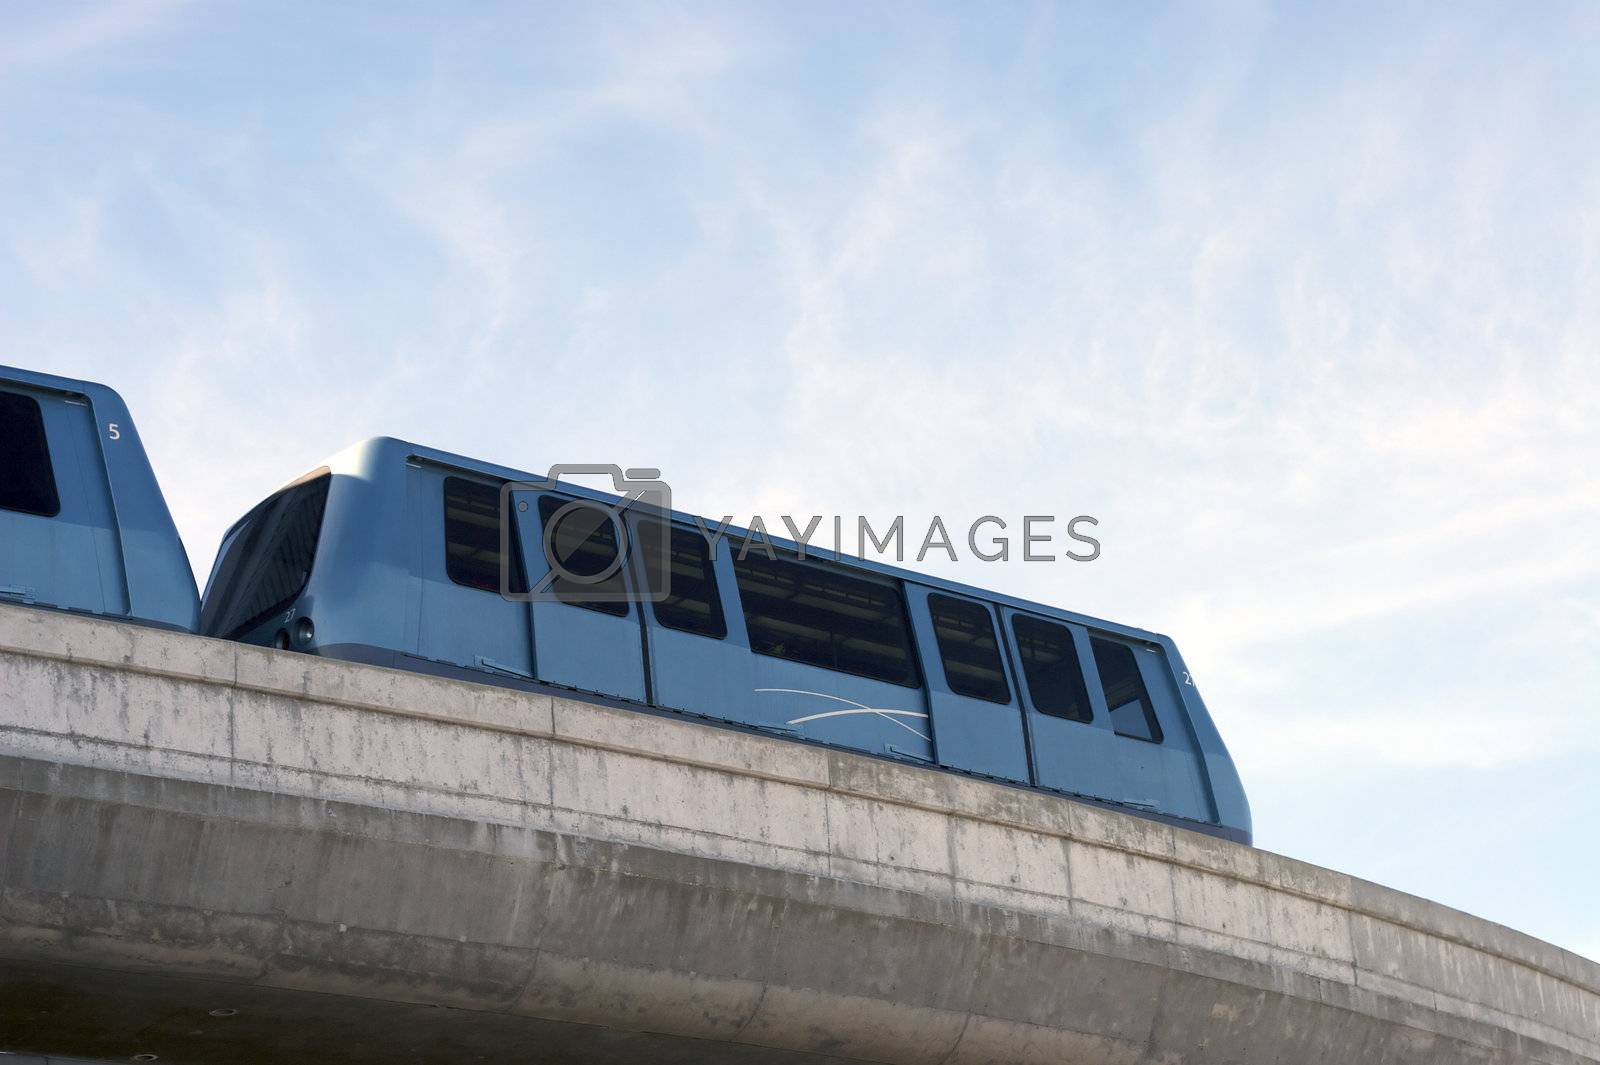 Royalty free image of San Francisco Monorail by jrtb